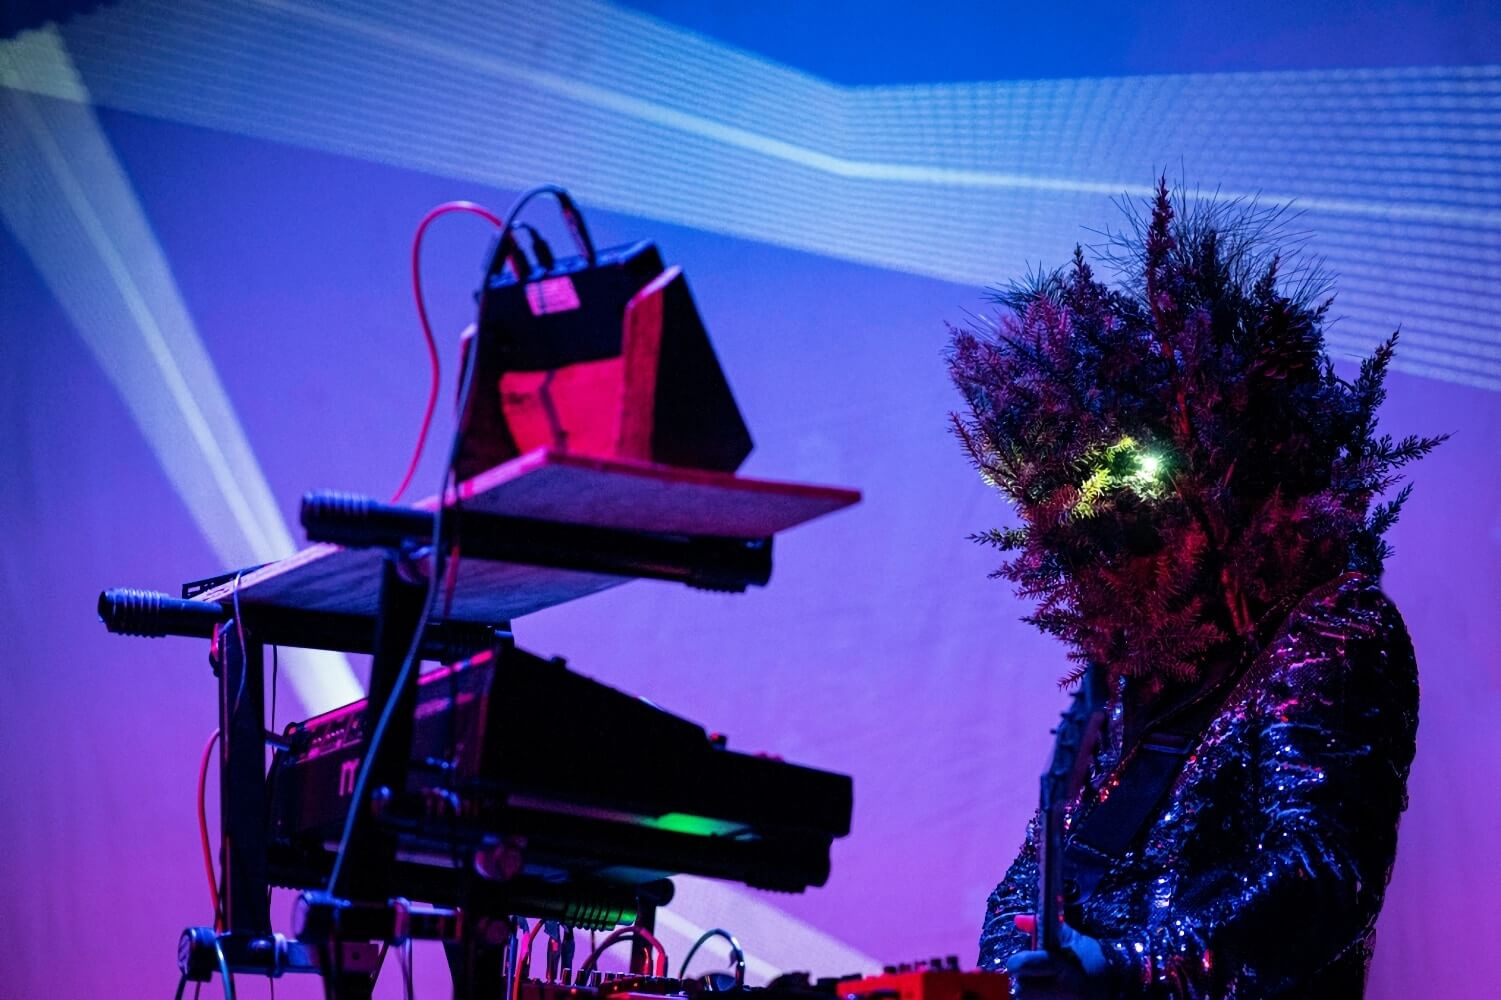 Against a red and purple background decorated with white lines, a person wearing a dark reflective jacket and illuminated, fully enclosed helmet made out of fir tree branches, stands in front of a DJ table.